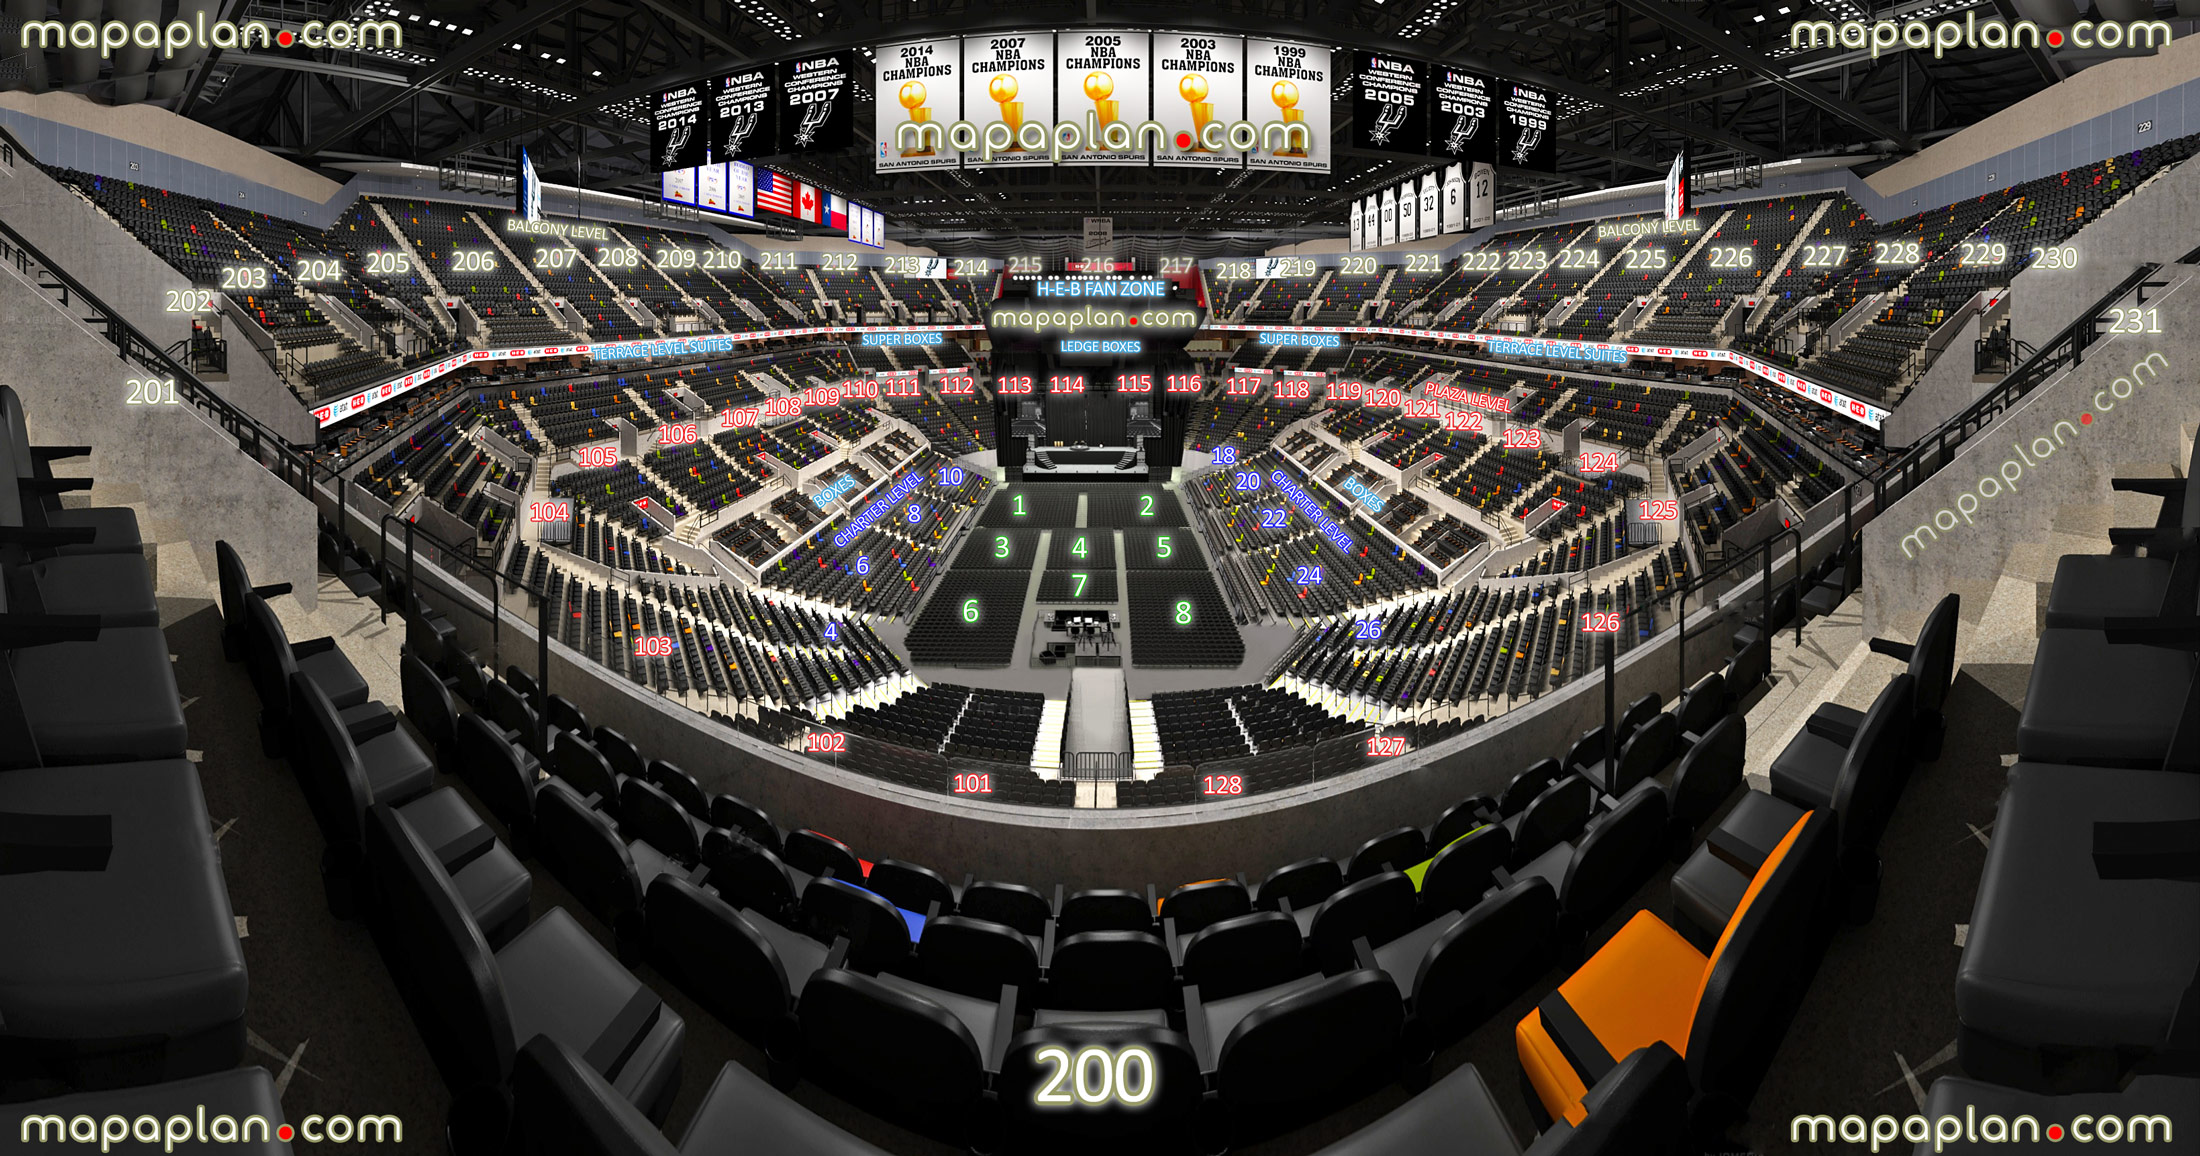 view section 200 row 5 seat 8 virtual venue 3d interactive inside stage review tour concert interior picture charter plaza terrace balcony levels suites floor 1 2 3 4 5 6 7 8 San Antonio ATT Center seating chart